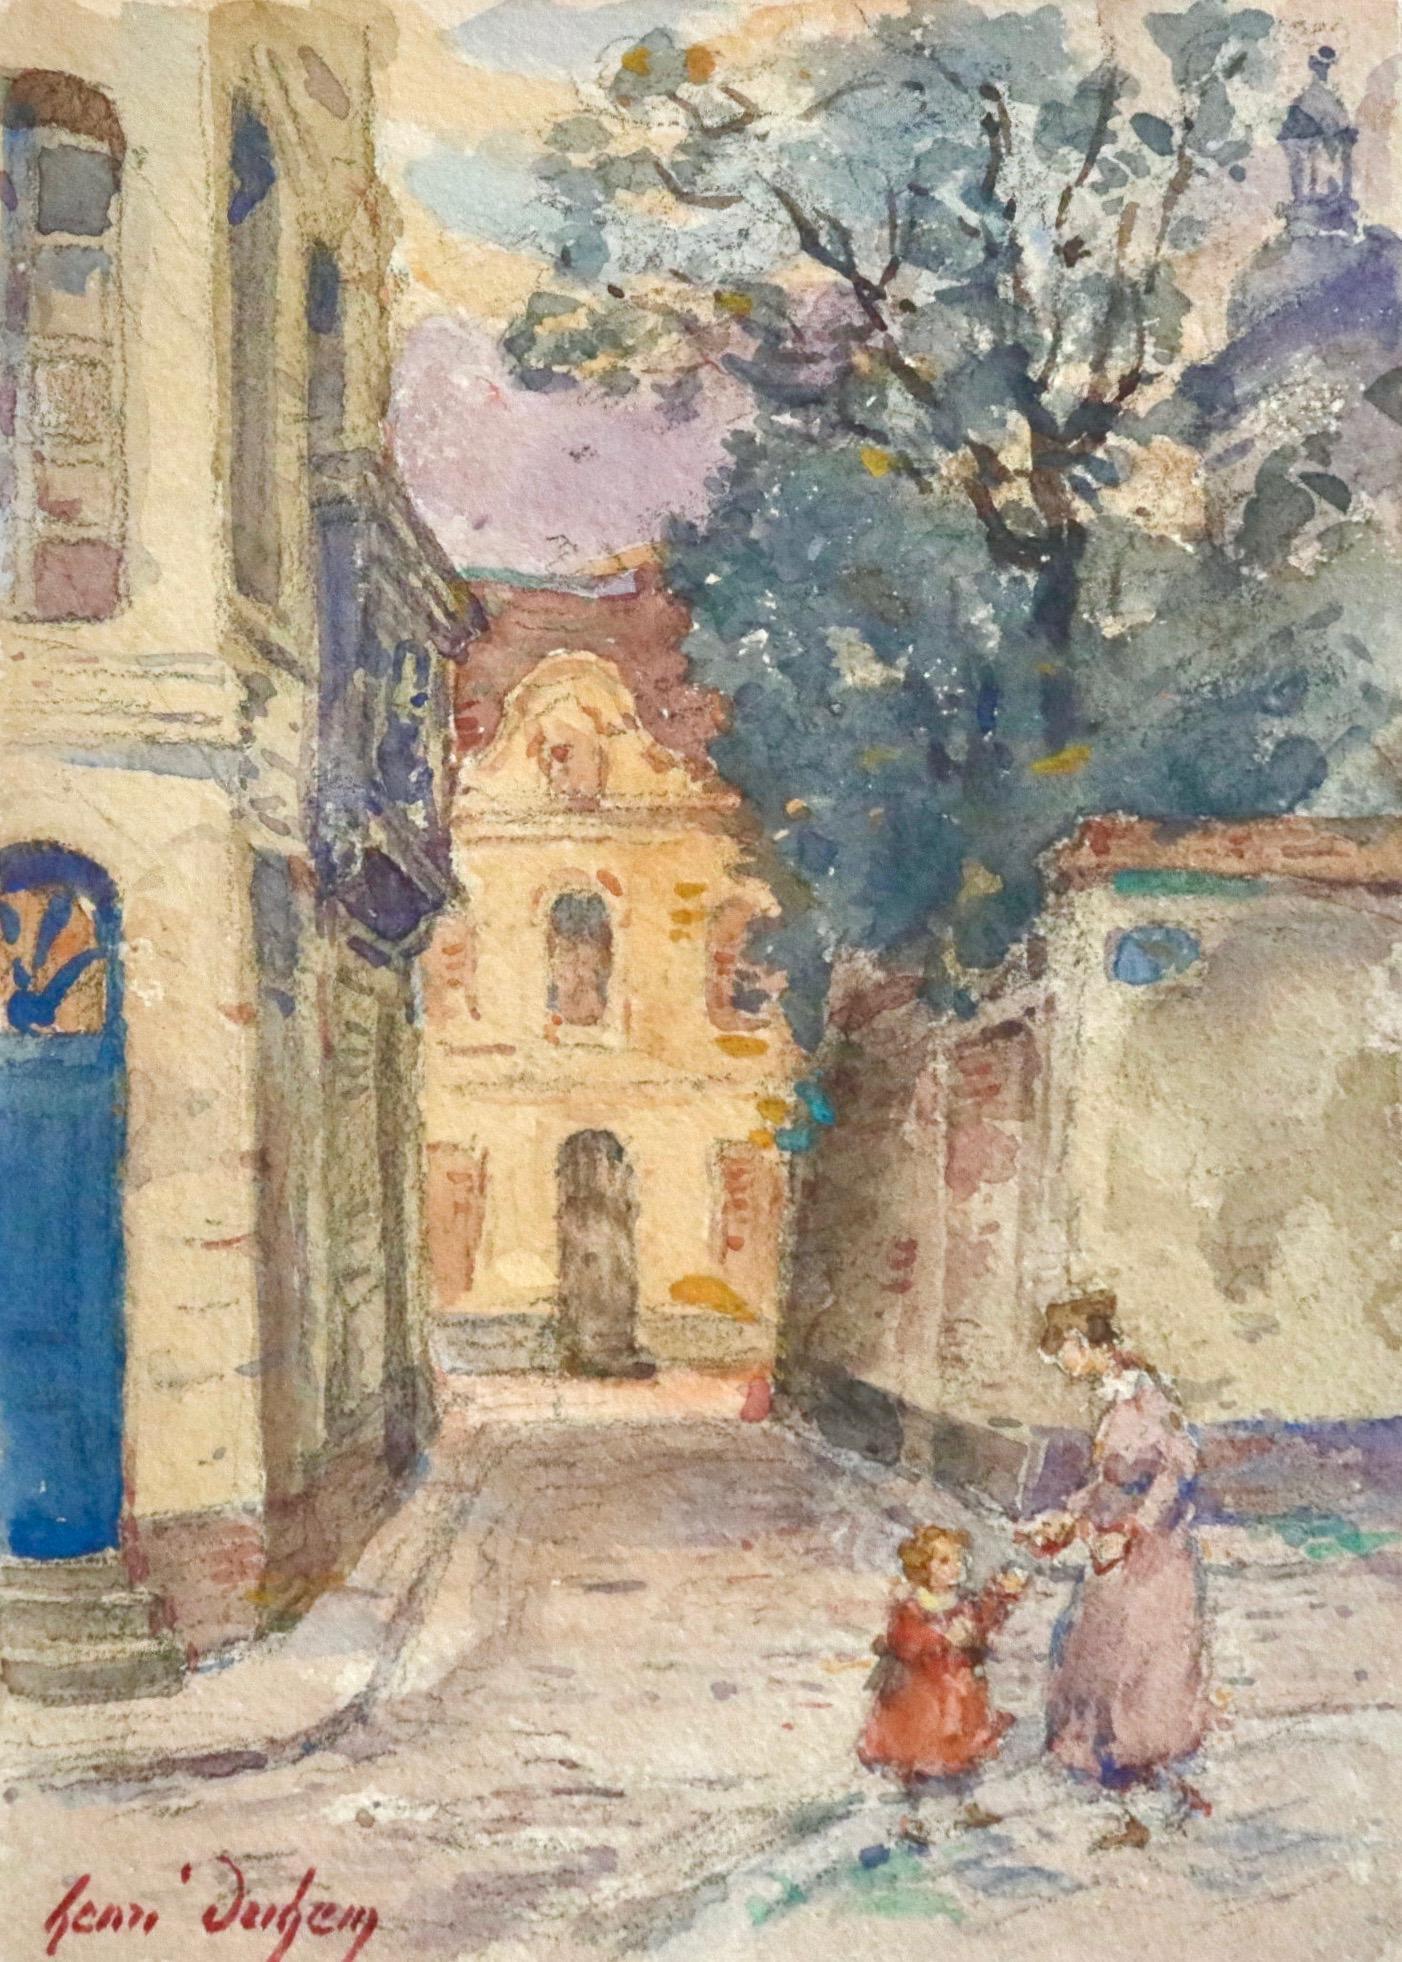 A lovely watercolour on paper circa 1925 by Henri Duhem depicting a mother engaging with her young daughter in the street in a village. Signed lower left. This painting is not currently framed but a suitable frame can be sourced if